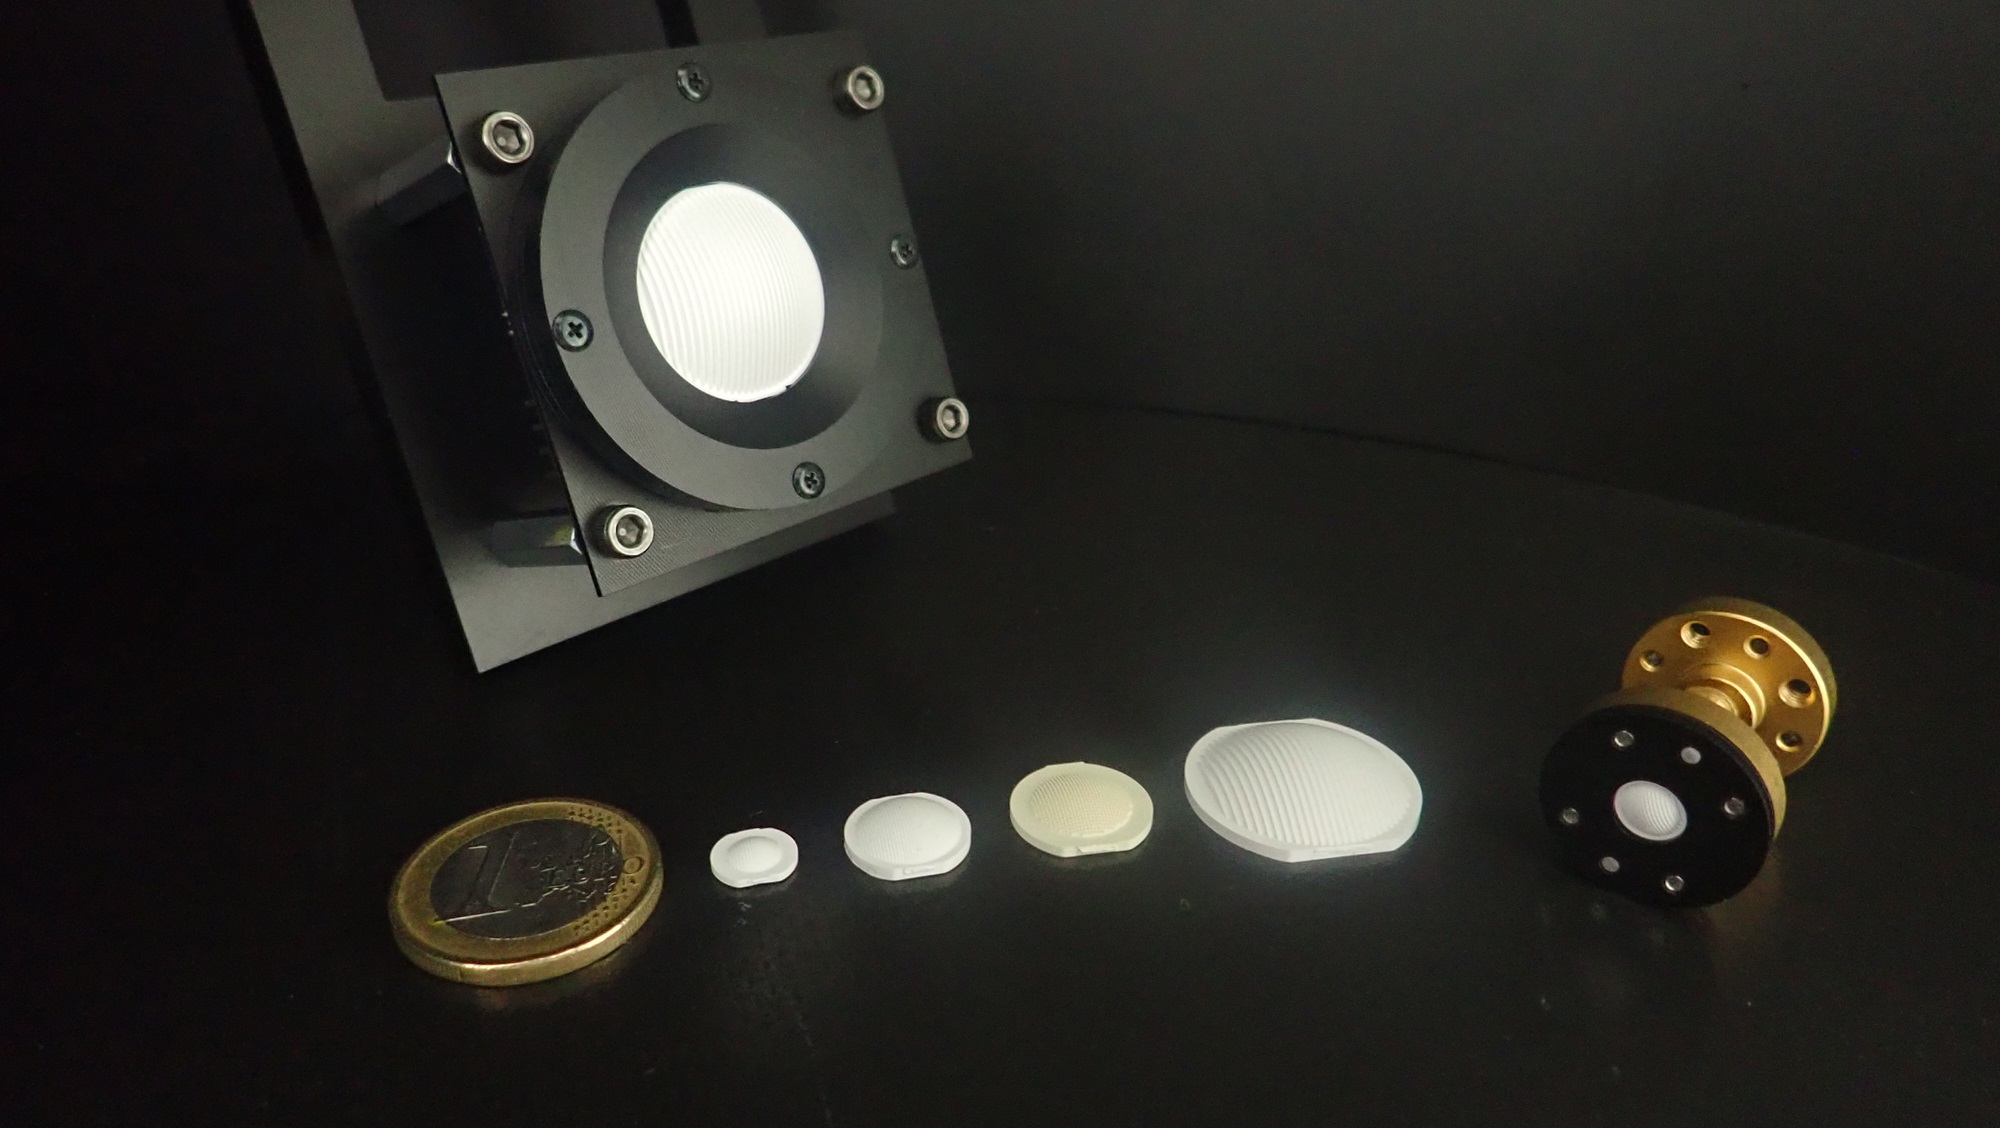 Injection Molded Lens Antenna compared to a one euro coin